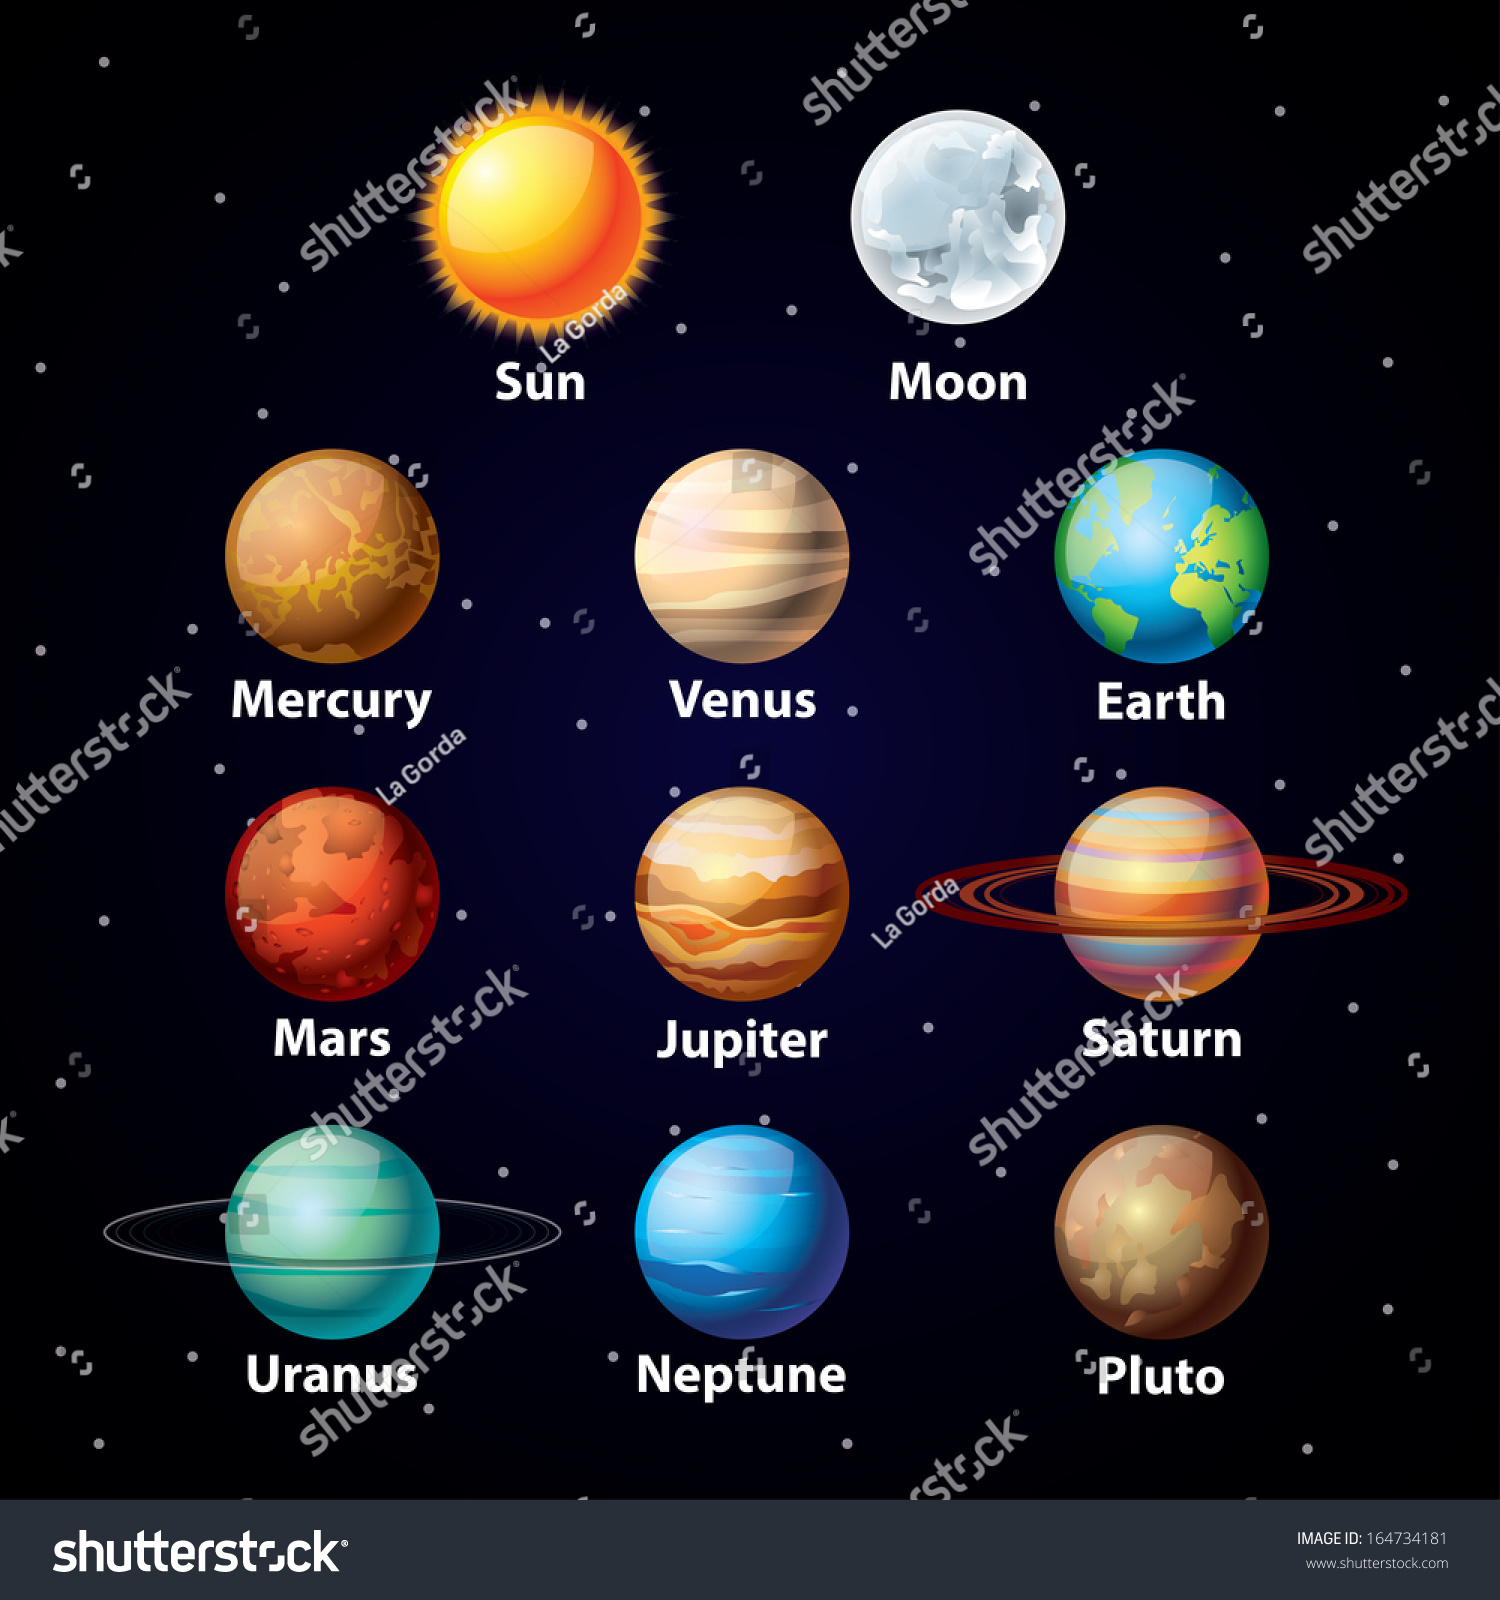 Glossy Planets Colorful Vector Set On Stock Vector 164734181 - Shutterstock